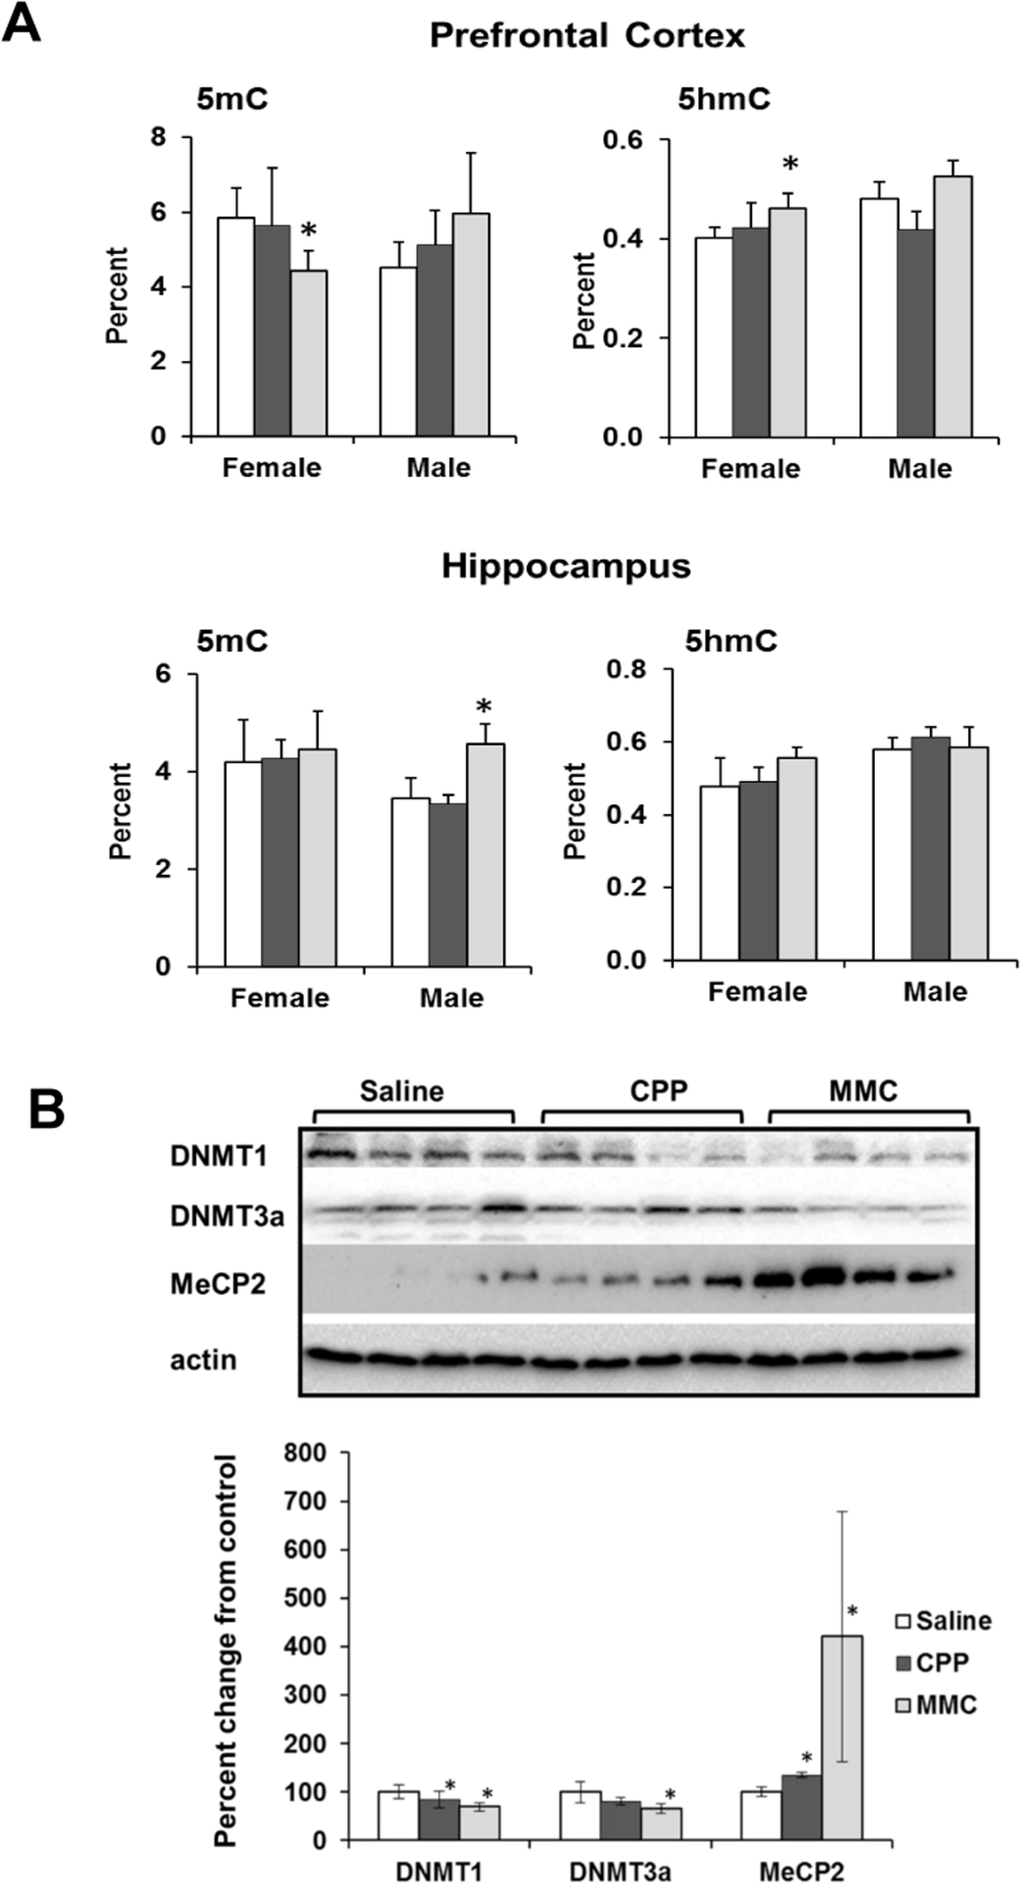 Altered DNA methylation in the PFC and hippocampus tissues of chemotherapy-exposed animals